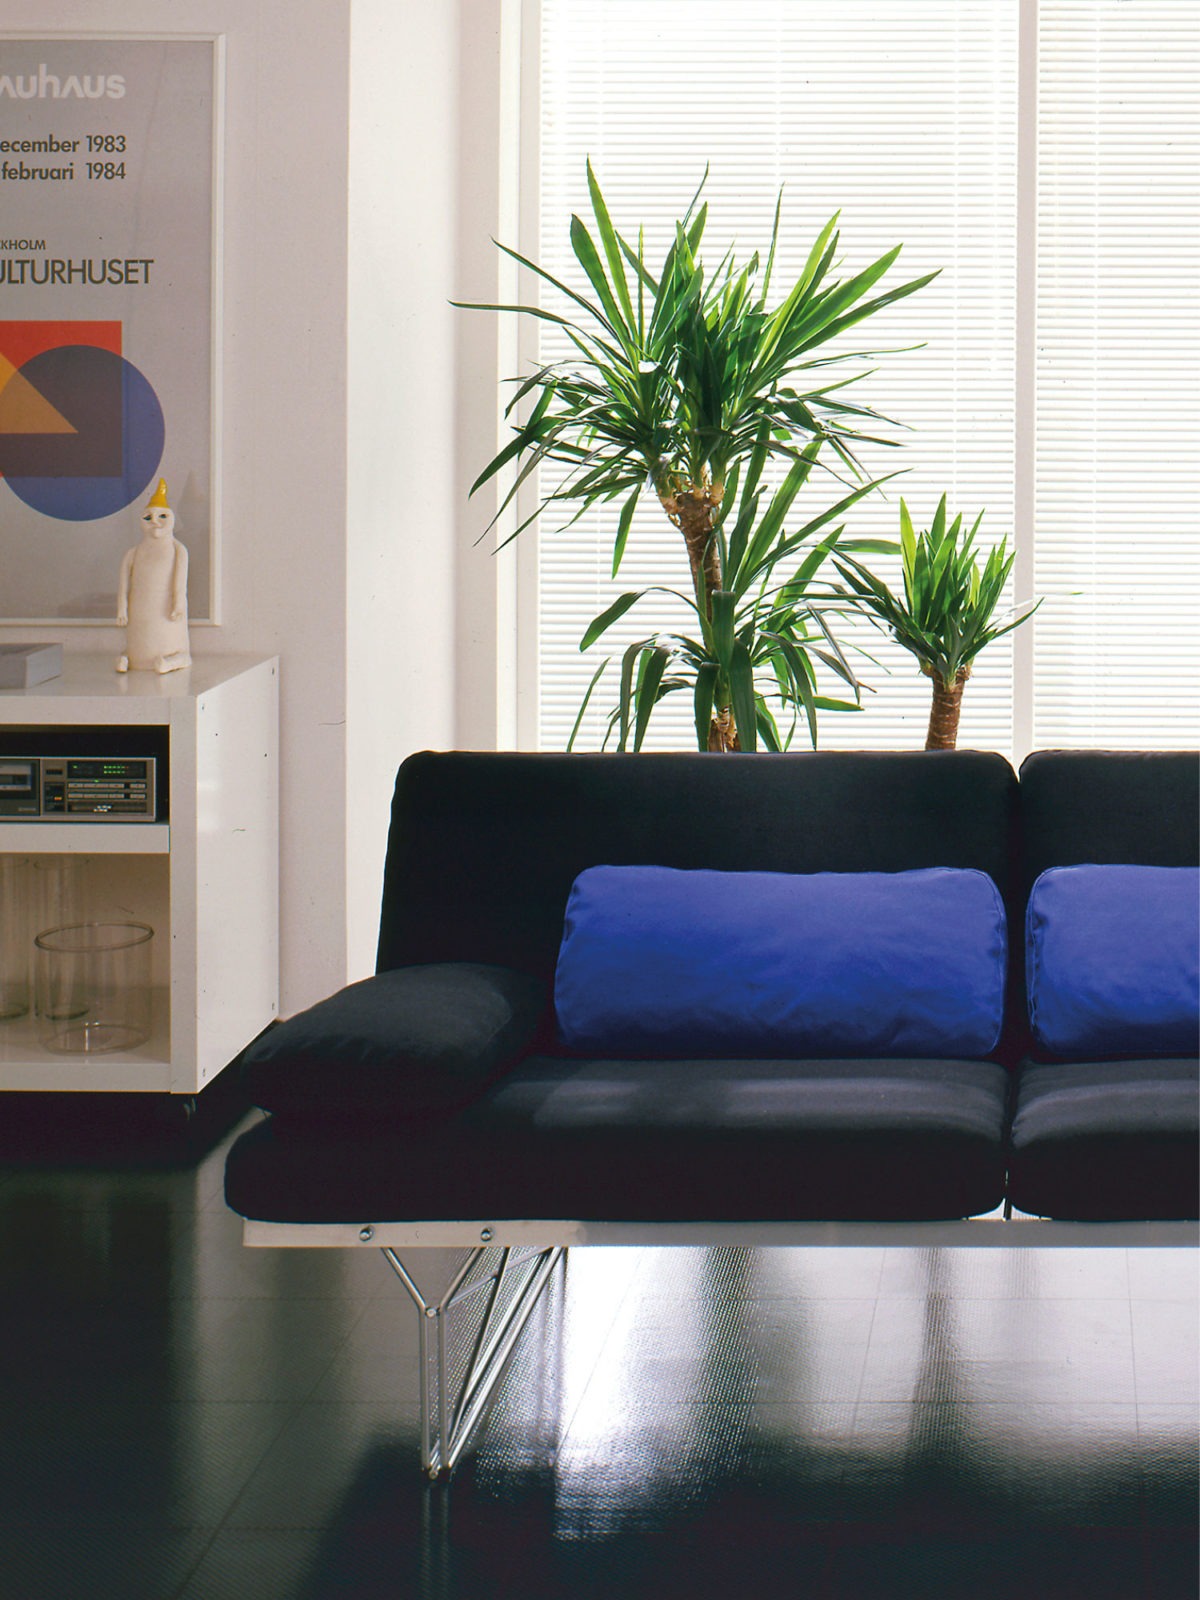 A black MOMENT sofa and a multicoloured MOMENT shelf with thin metal frames, in a room with a shiny black floor.